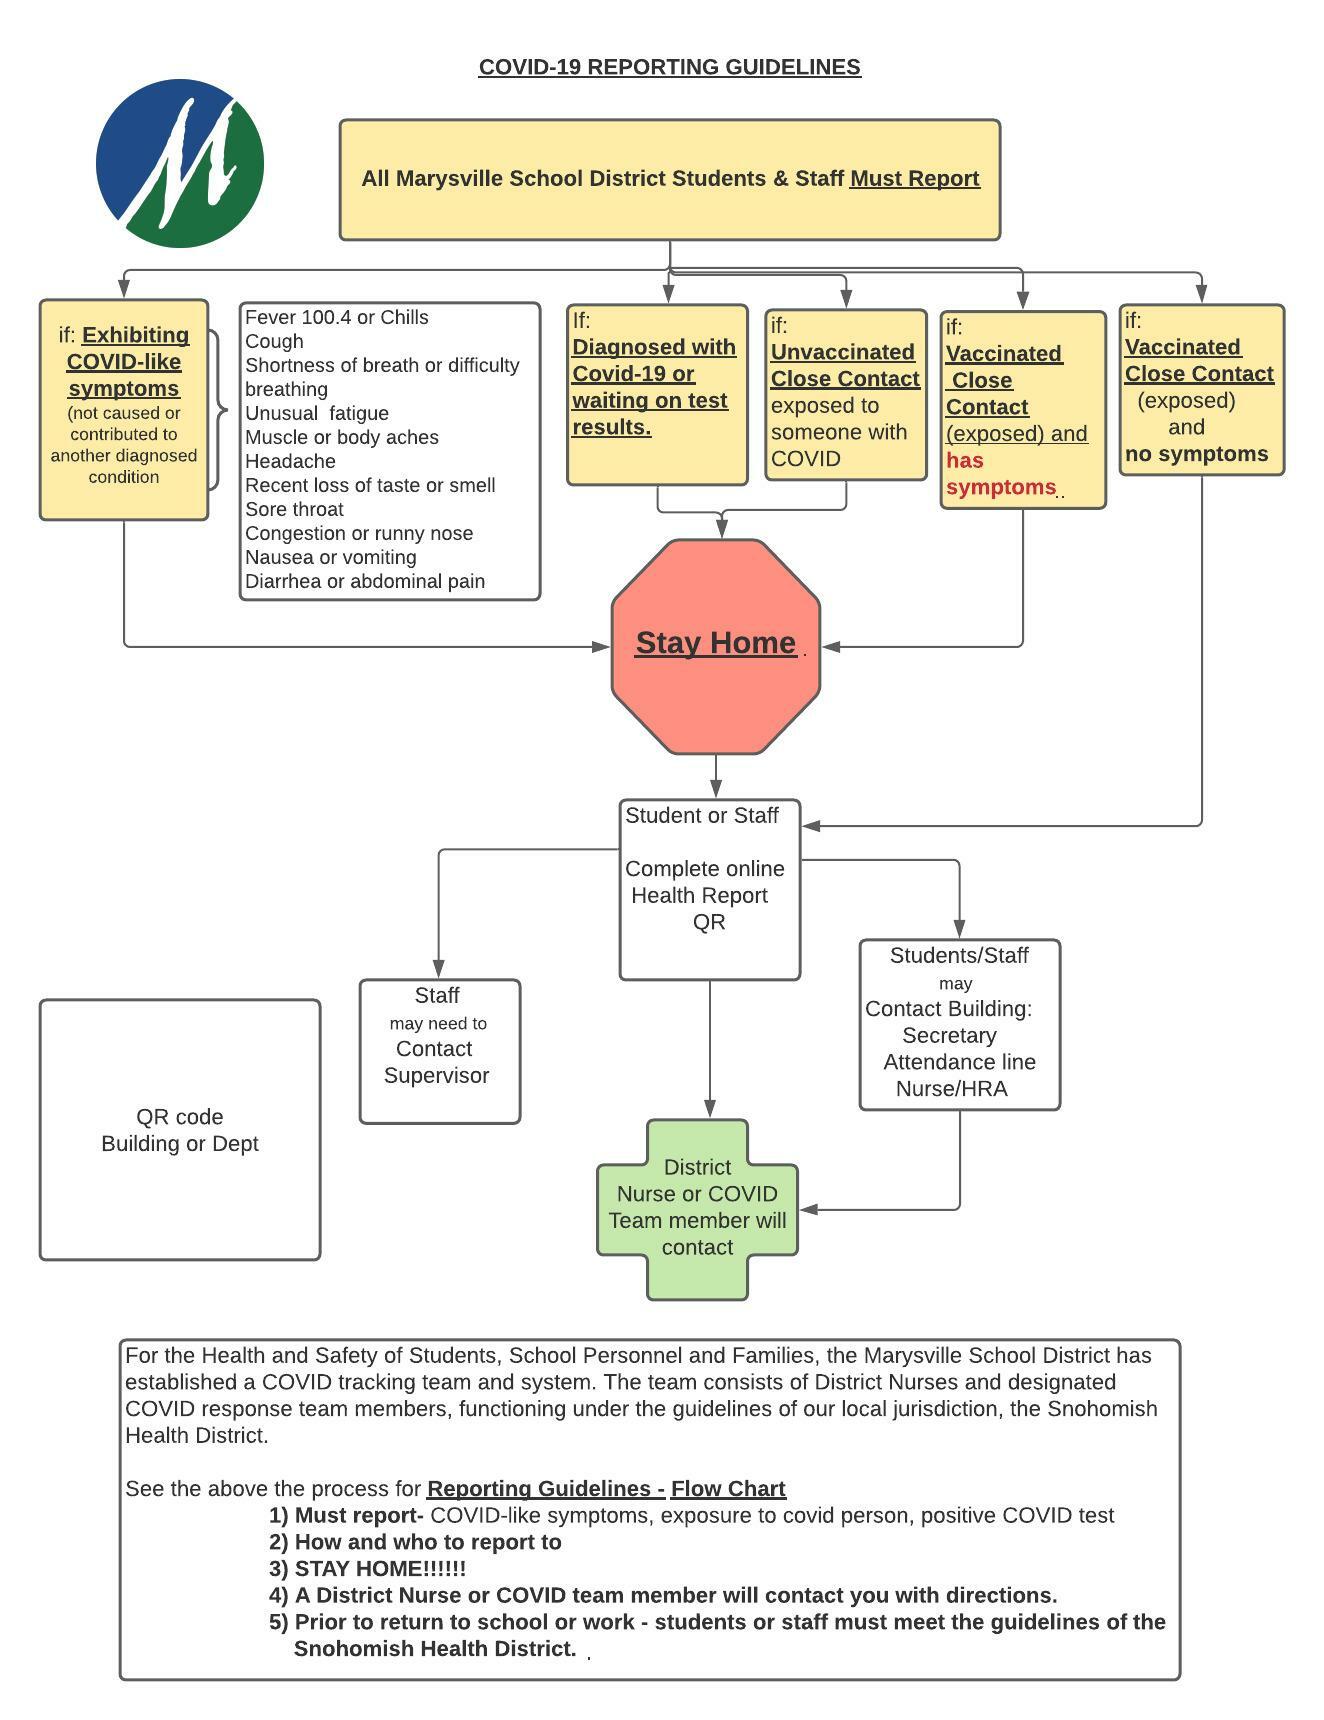 COVID-19 Reporting Flow Chart